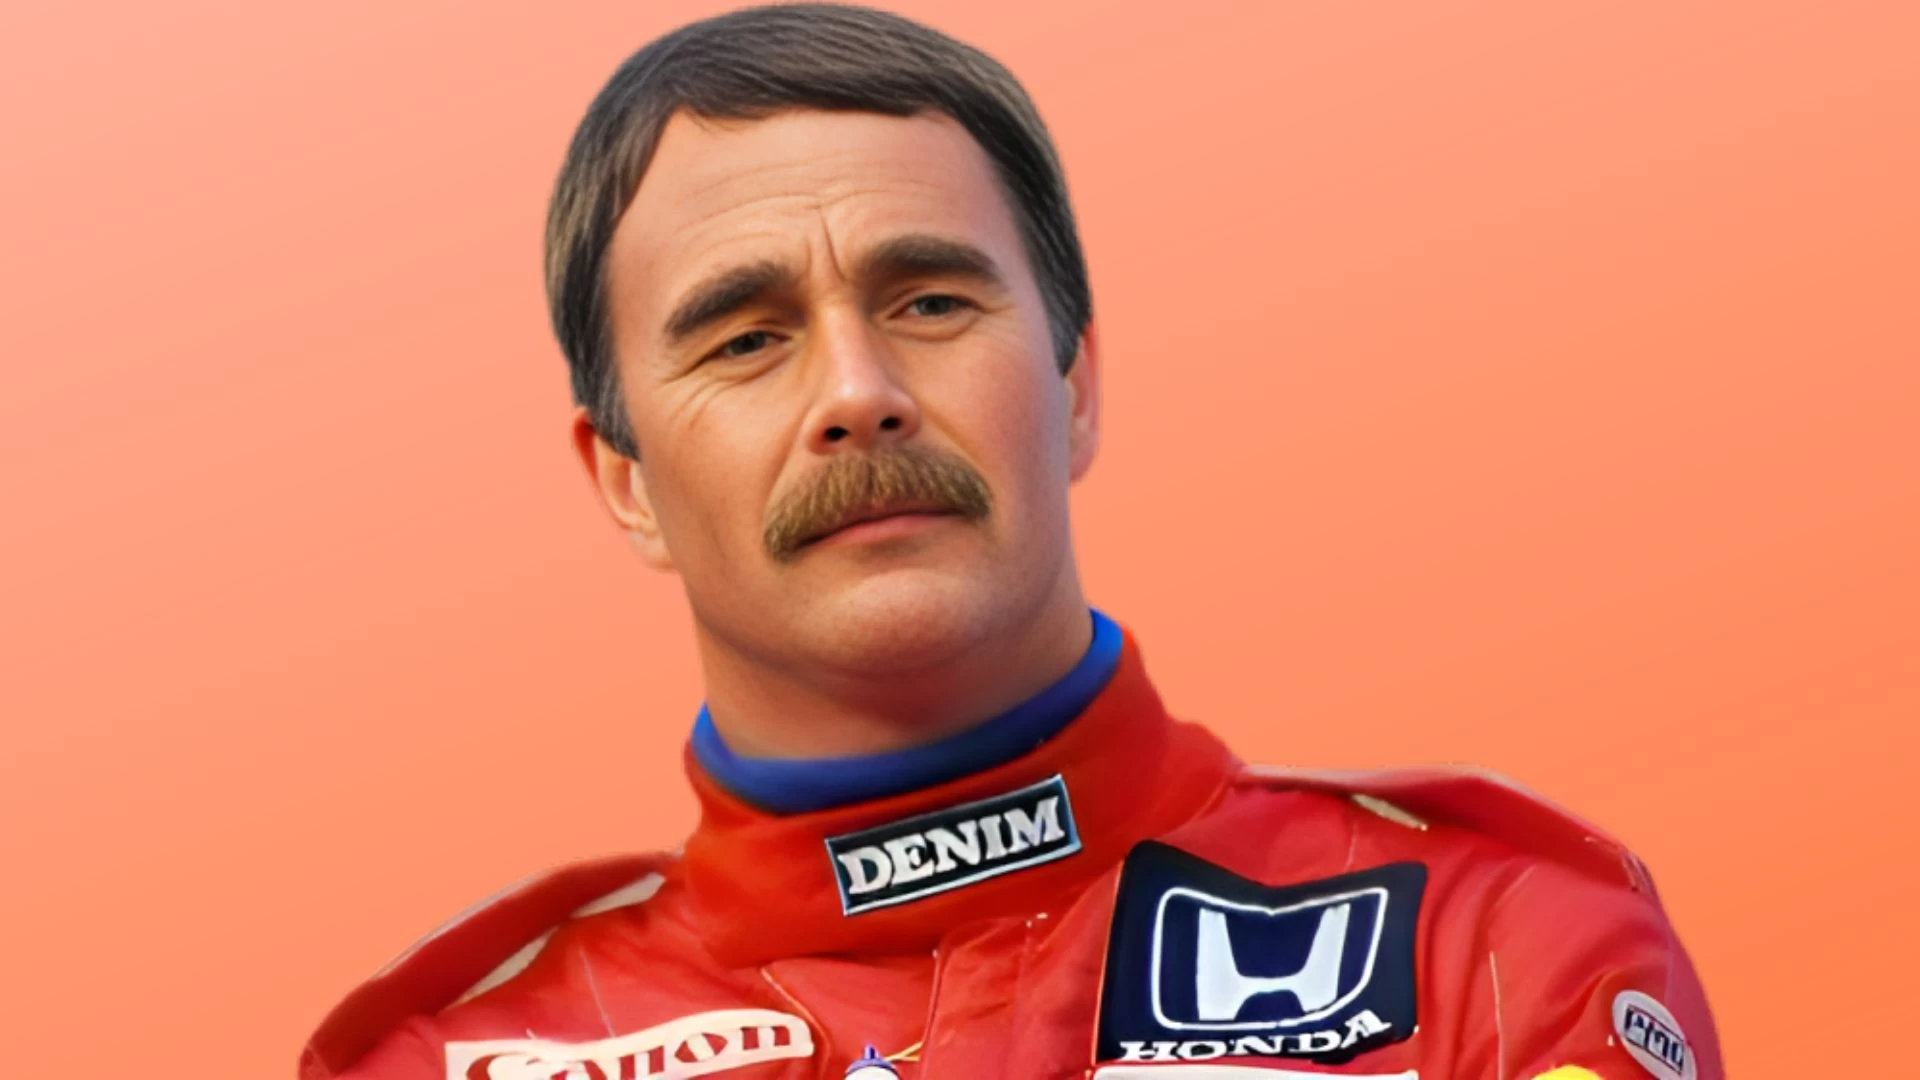 Nigel Mansell Ethnicity, What is Nigel Mansell's Ethnicity?